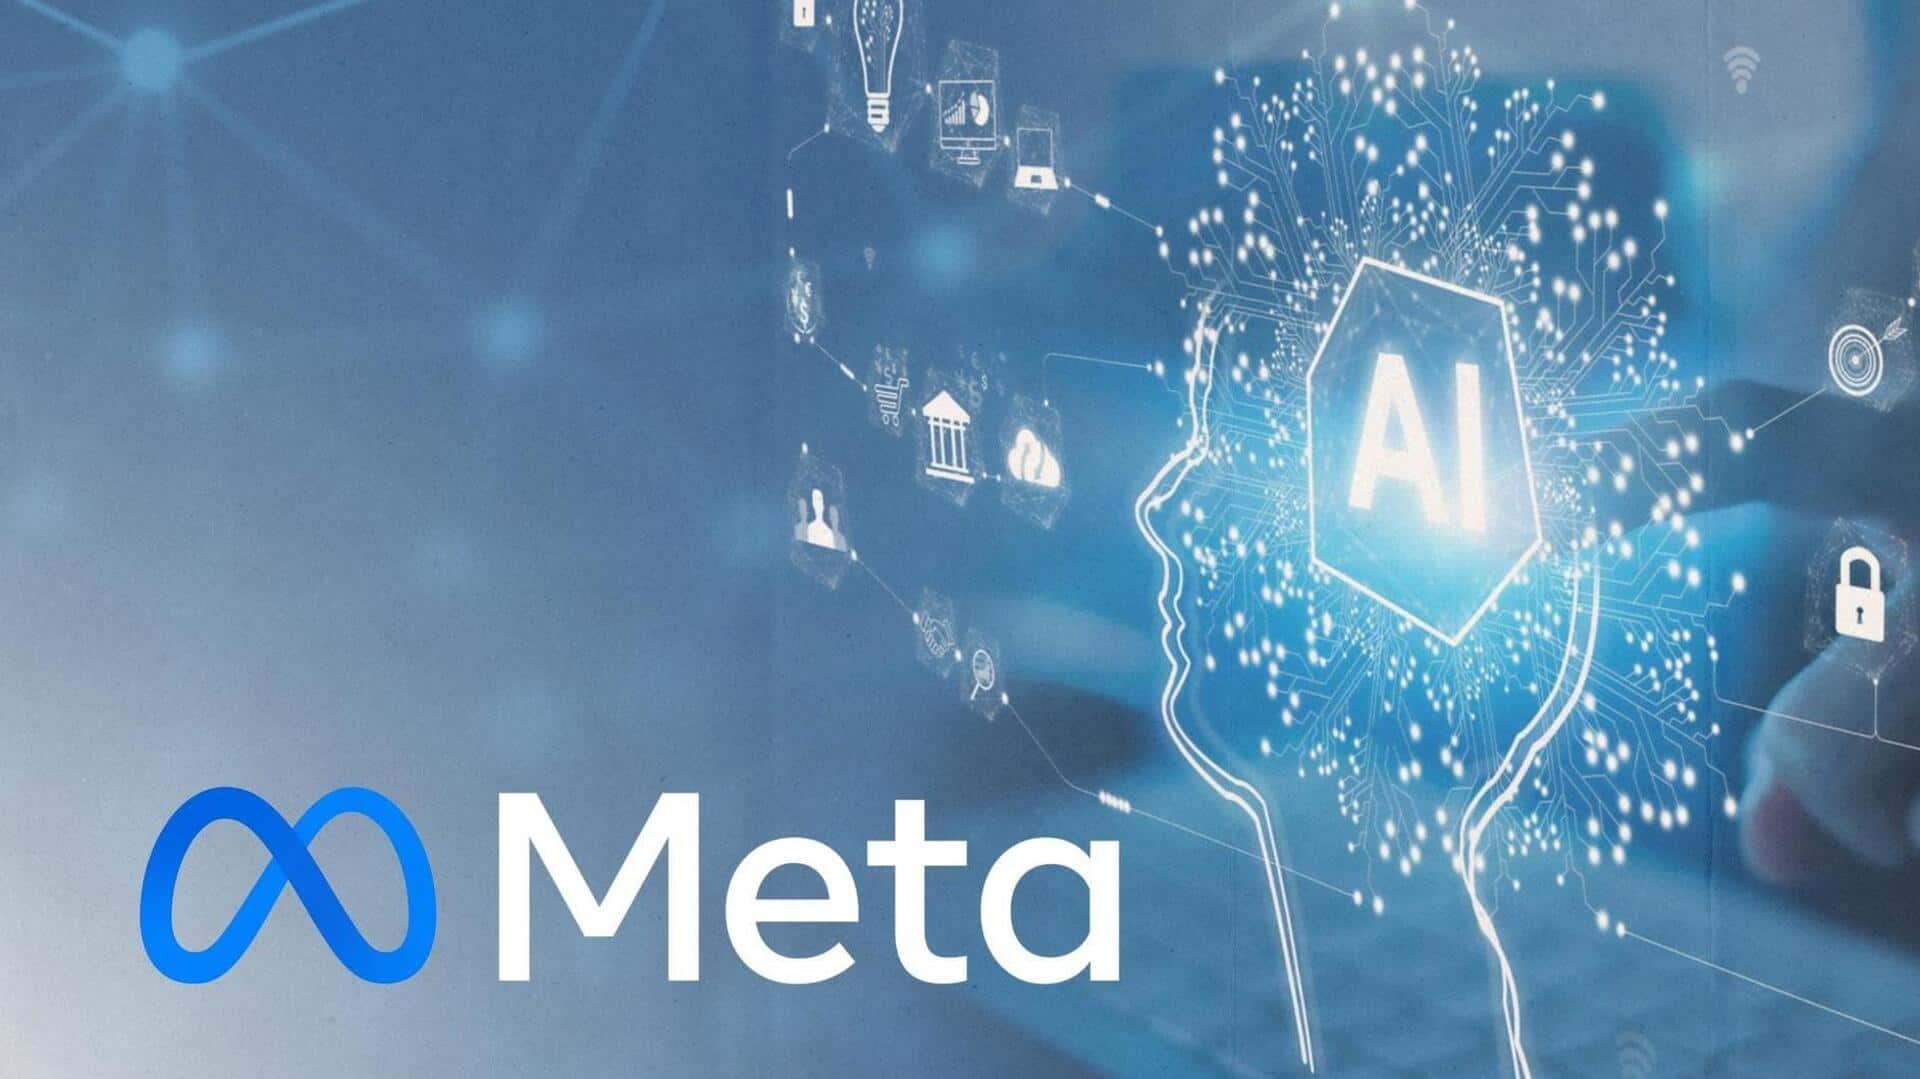 Meta is developing AI chatbots that can assume different personas